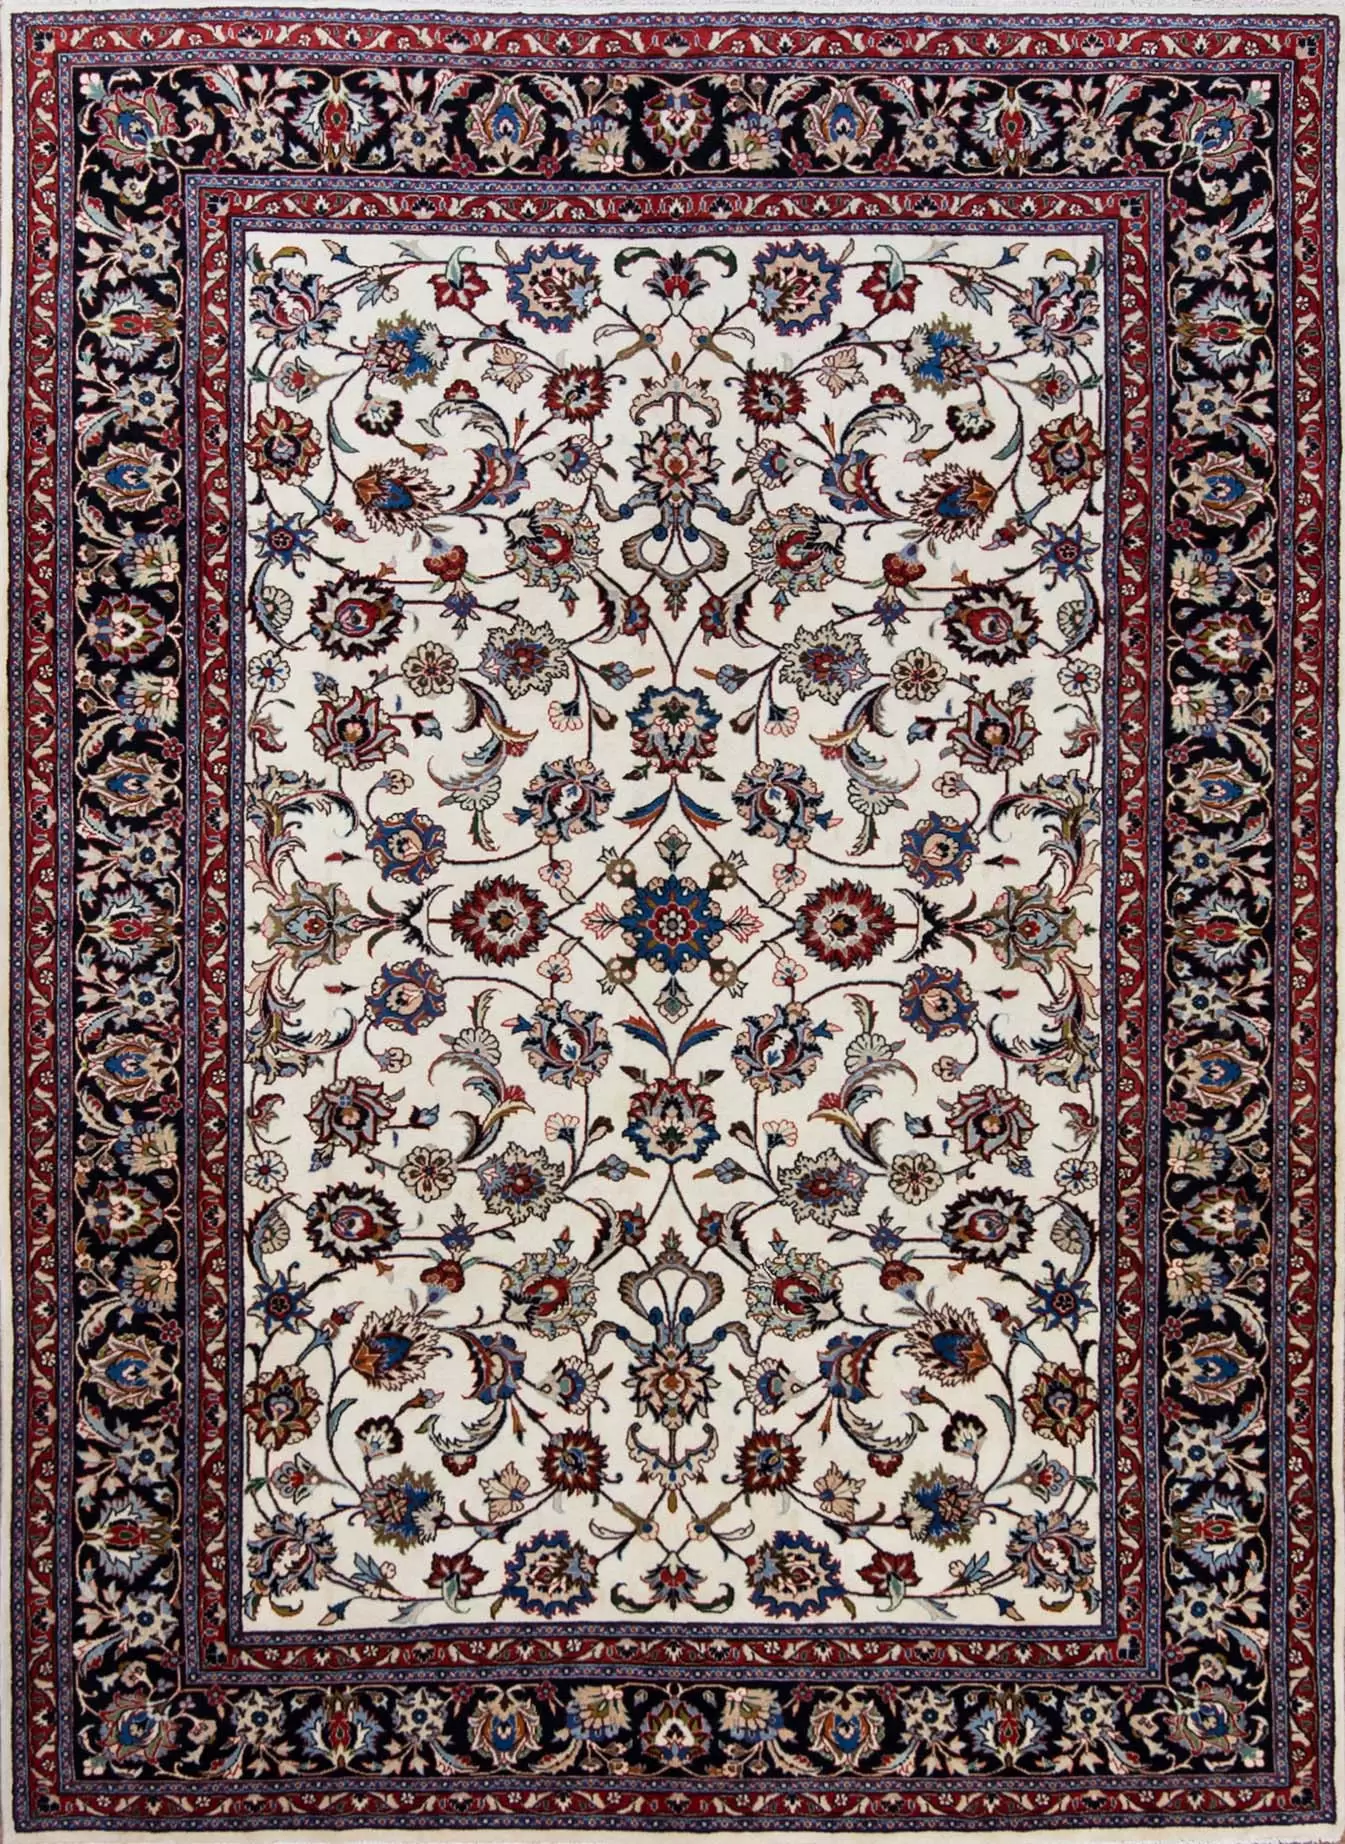 Carpet rug. hand knotted Persian Kashmar carpet made of wool, floral style with beige and navy blue. Size 6.8x9.7.